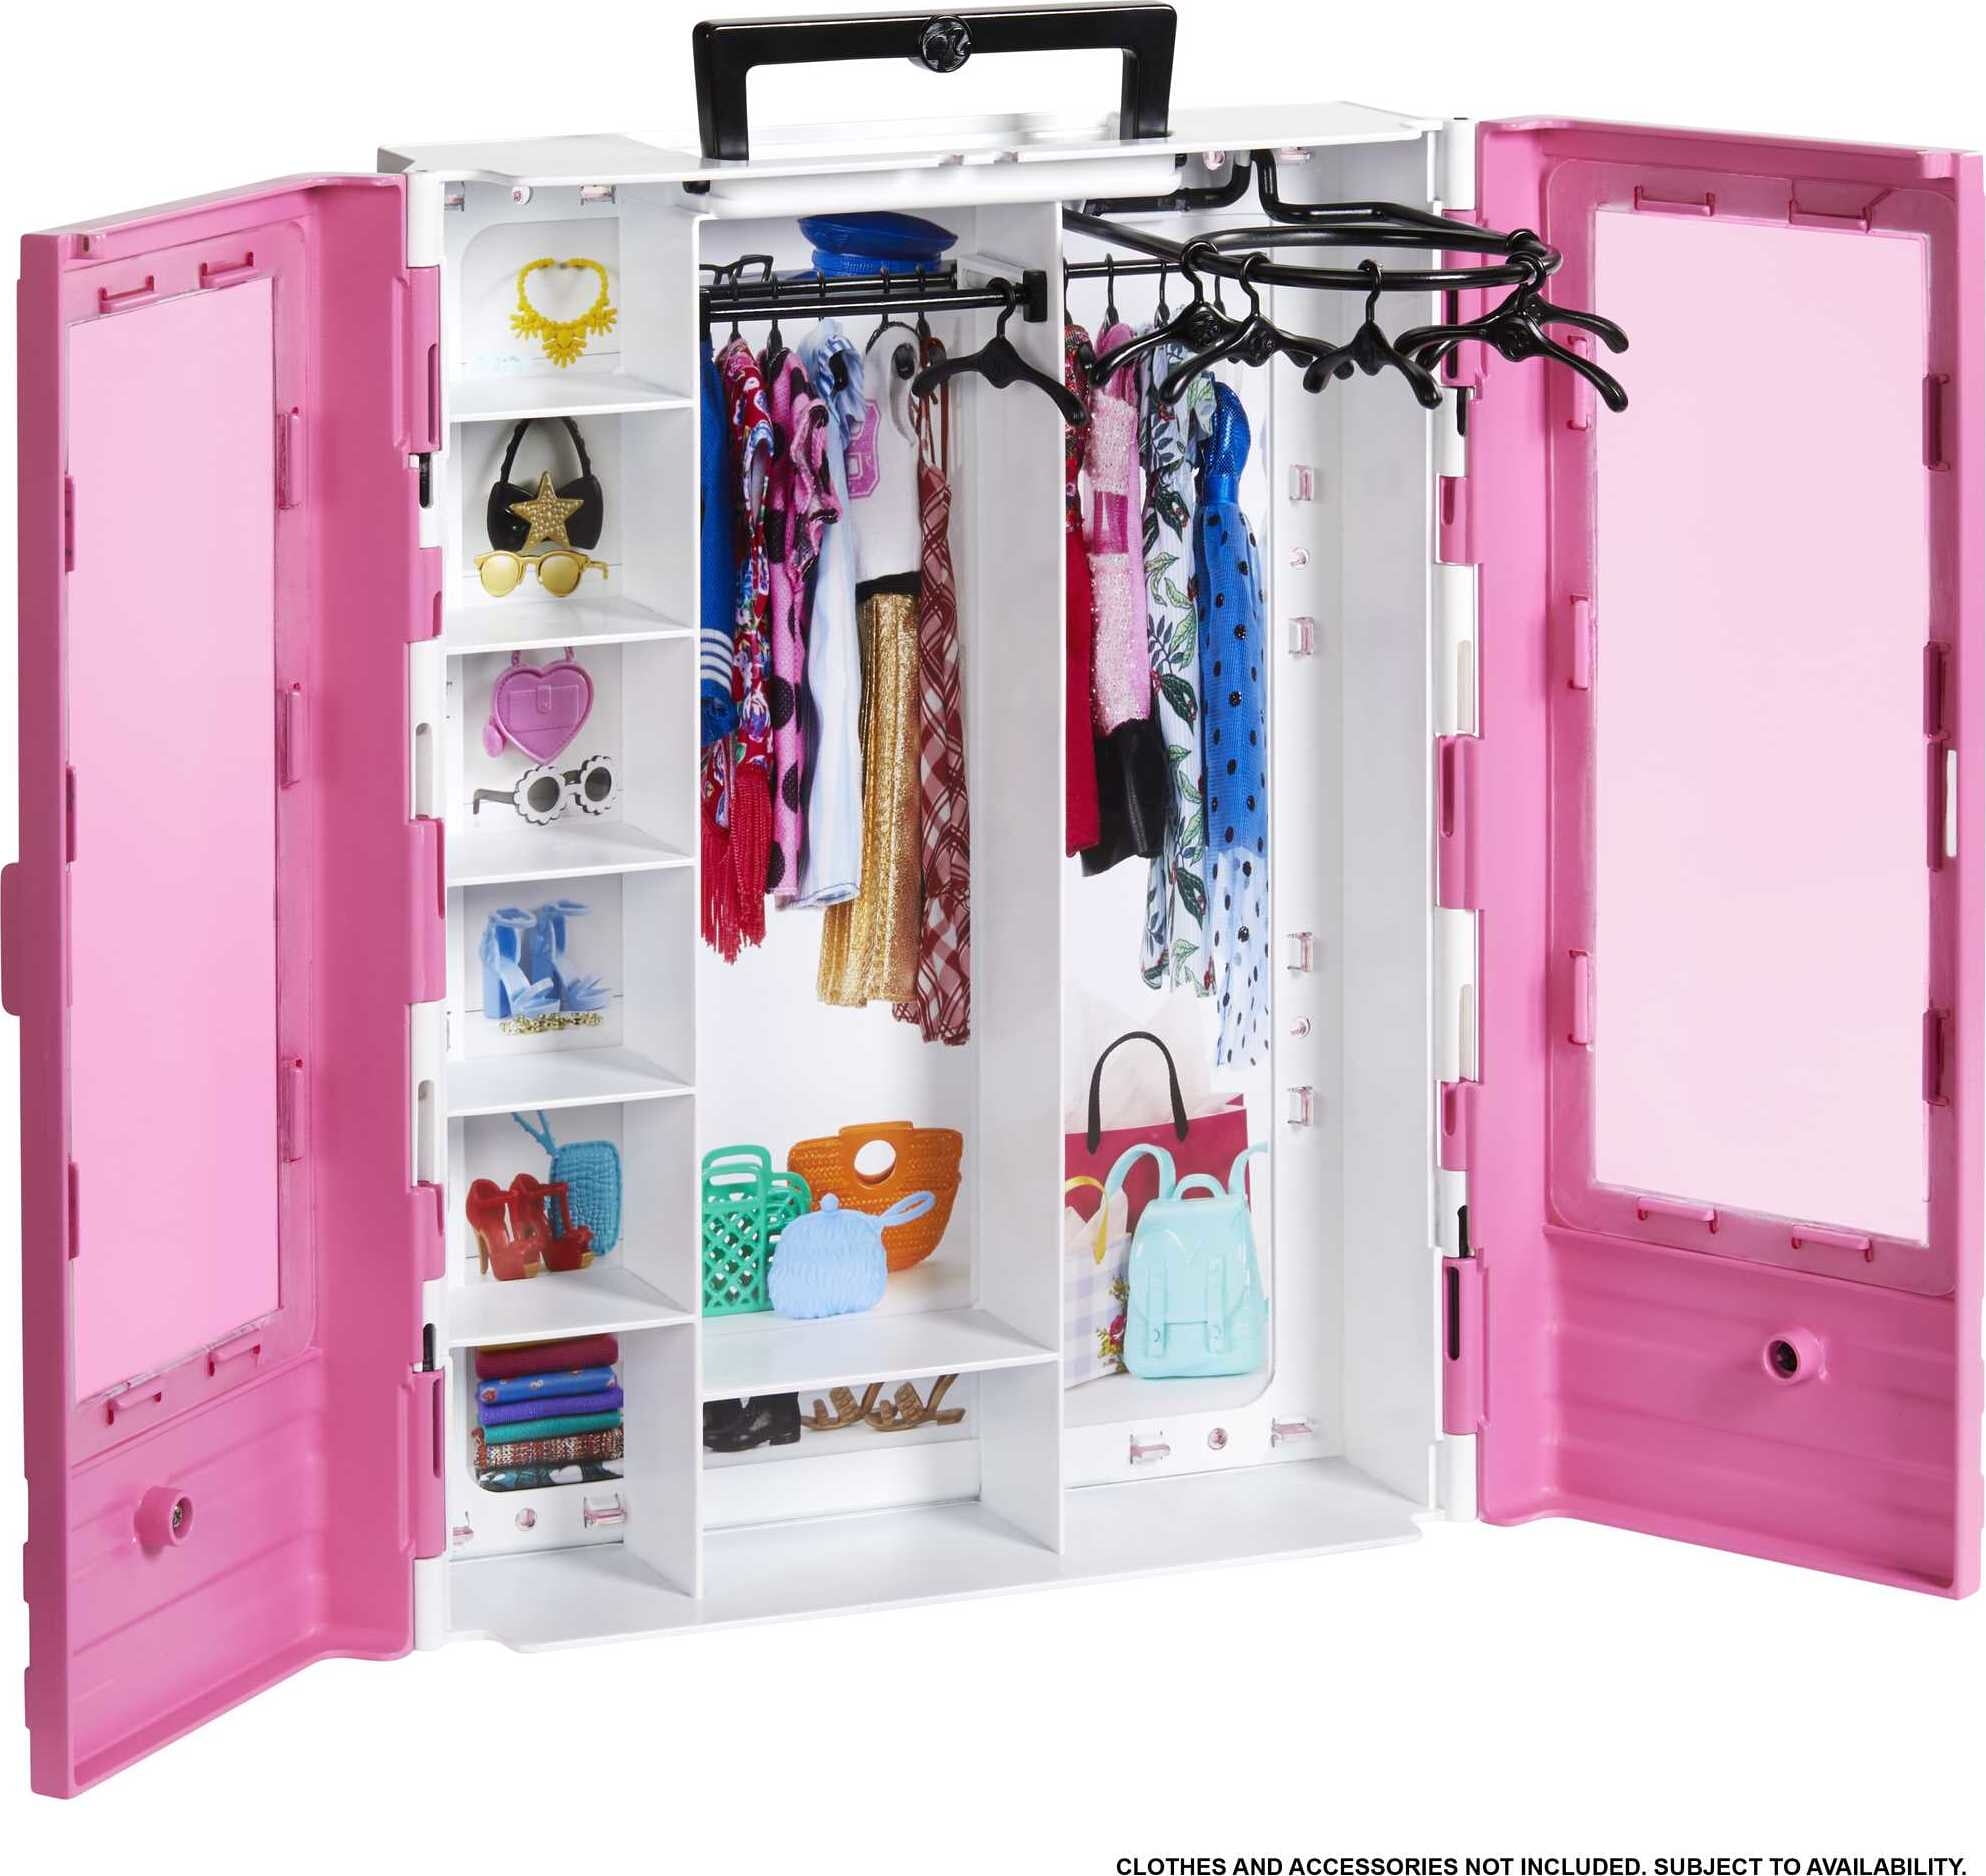 Barbie Fashionista Ultimate Closet, Portable with 6 Hangers